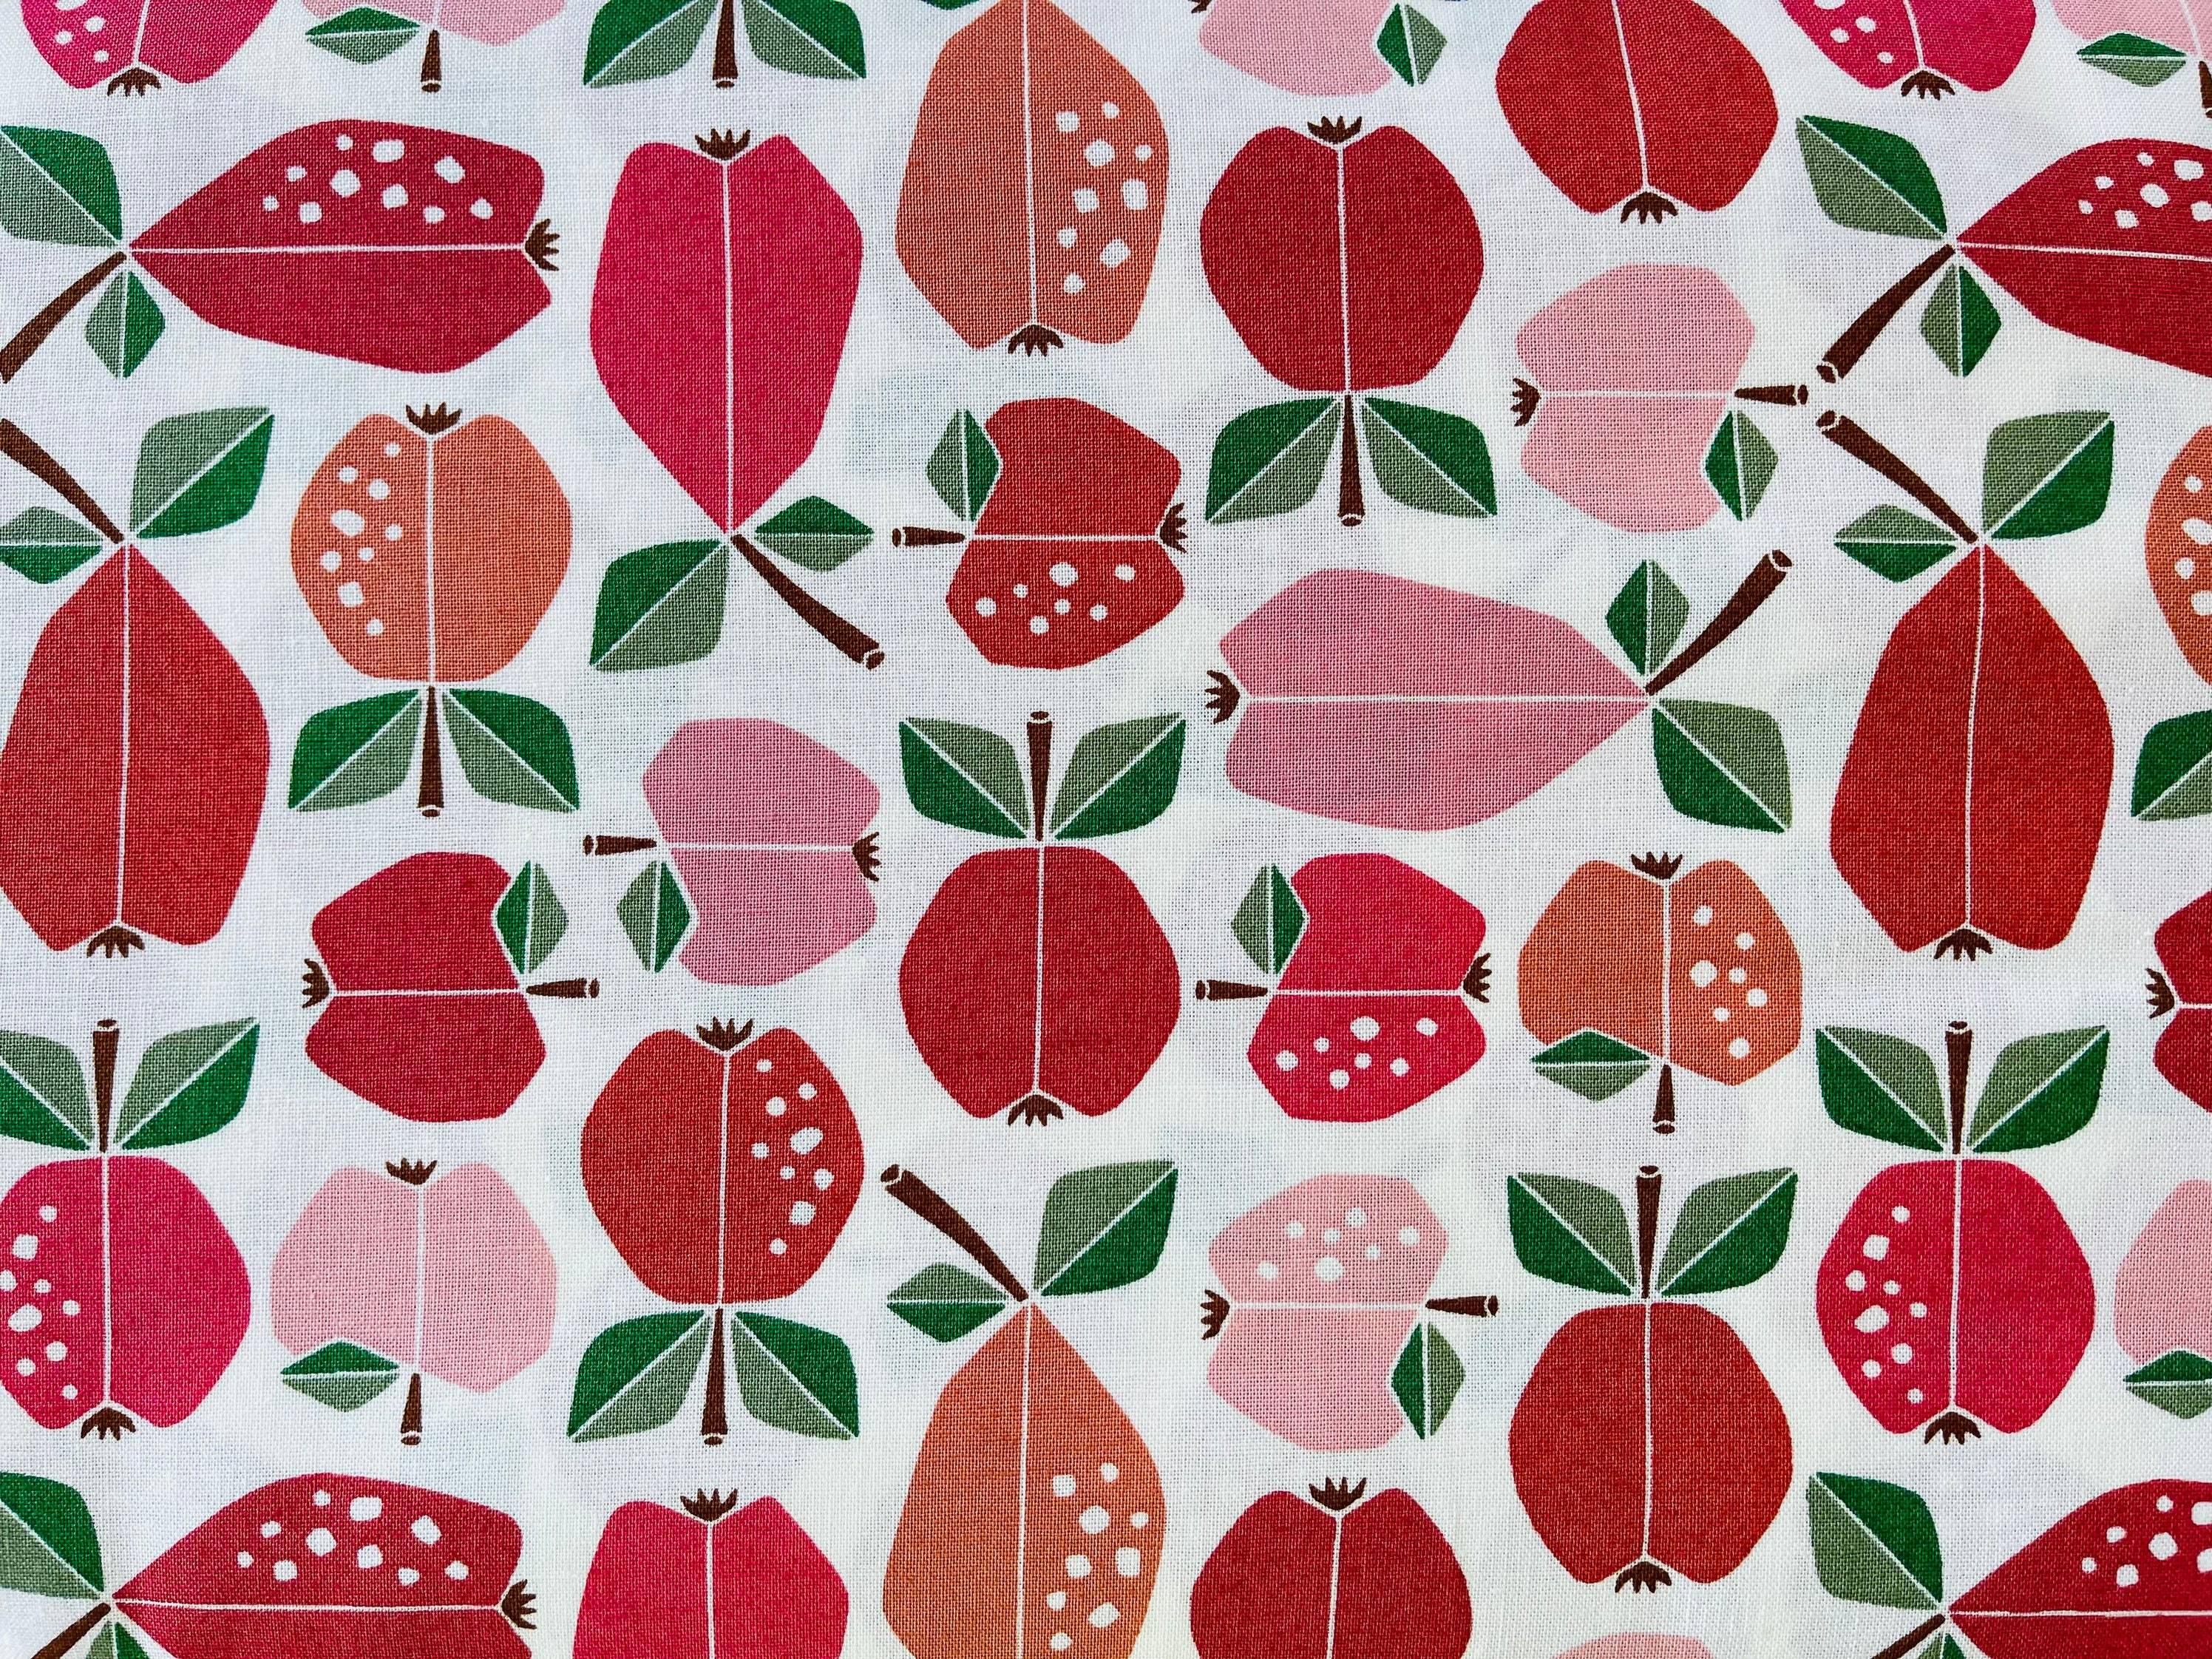 Under the Apple Tree - Orchard - Apple Red Fabric - Loes Van Oosten - Red - Pink - Green - Cotton + Steel  - Quilting Cotton - LV503-AR1